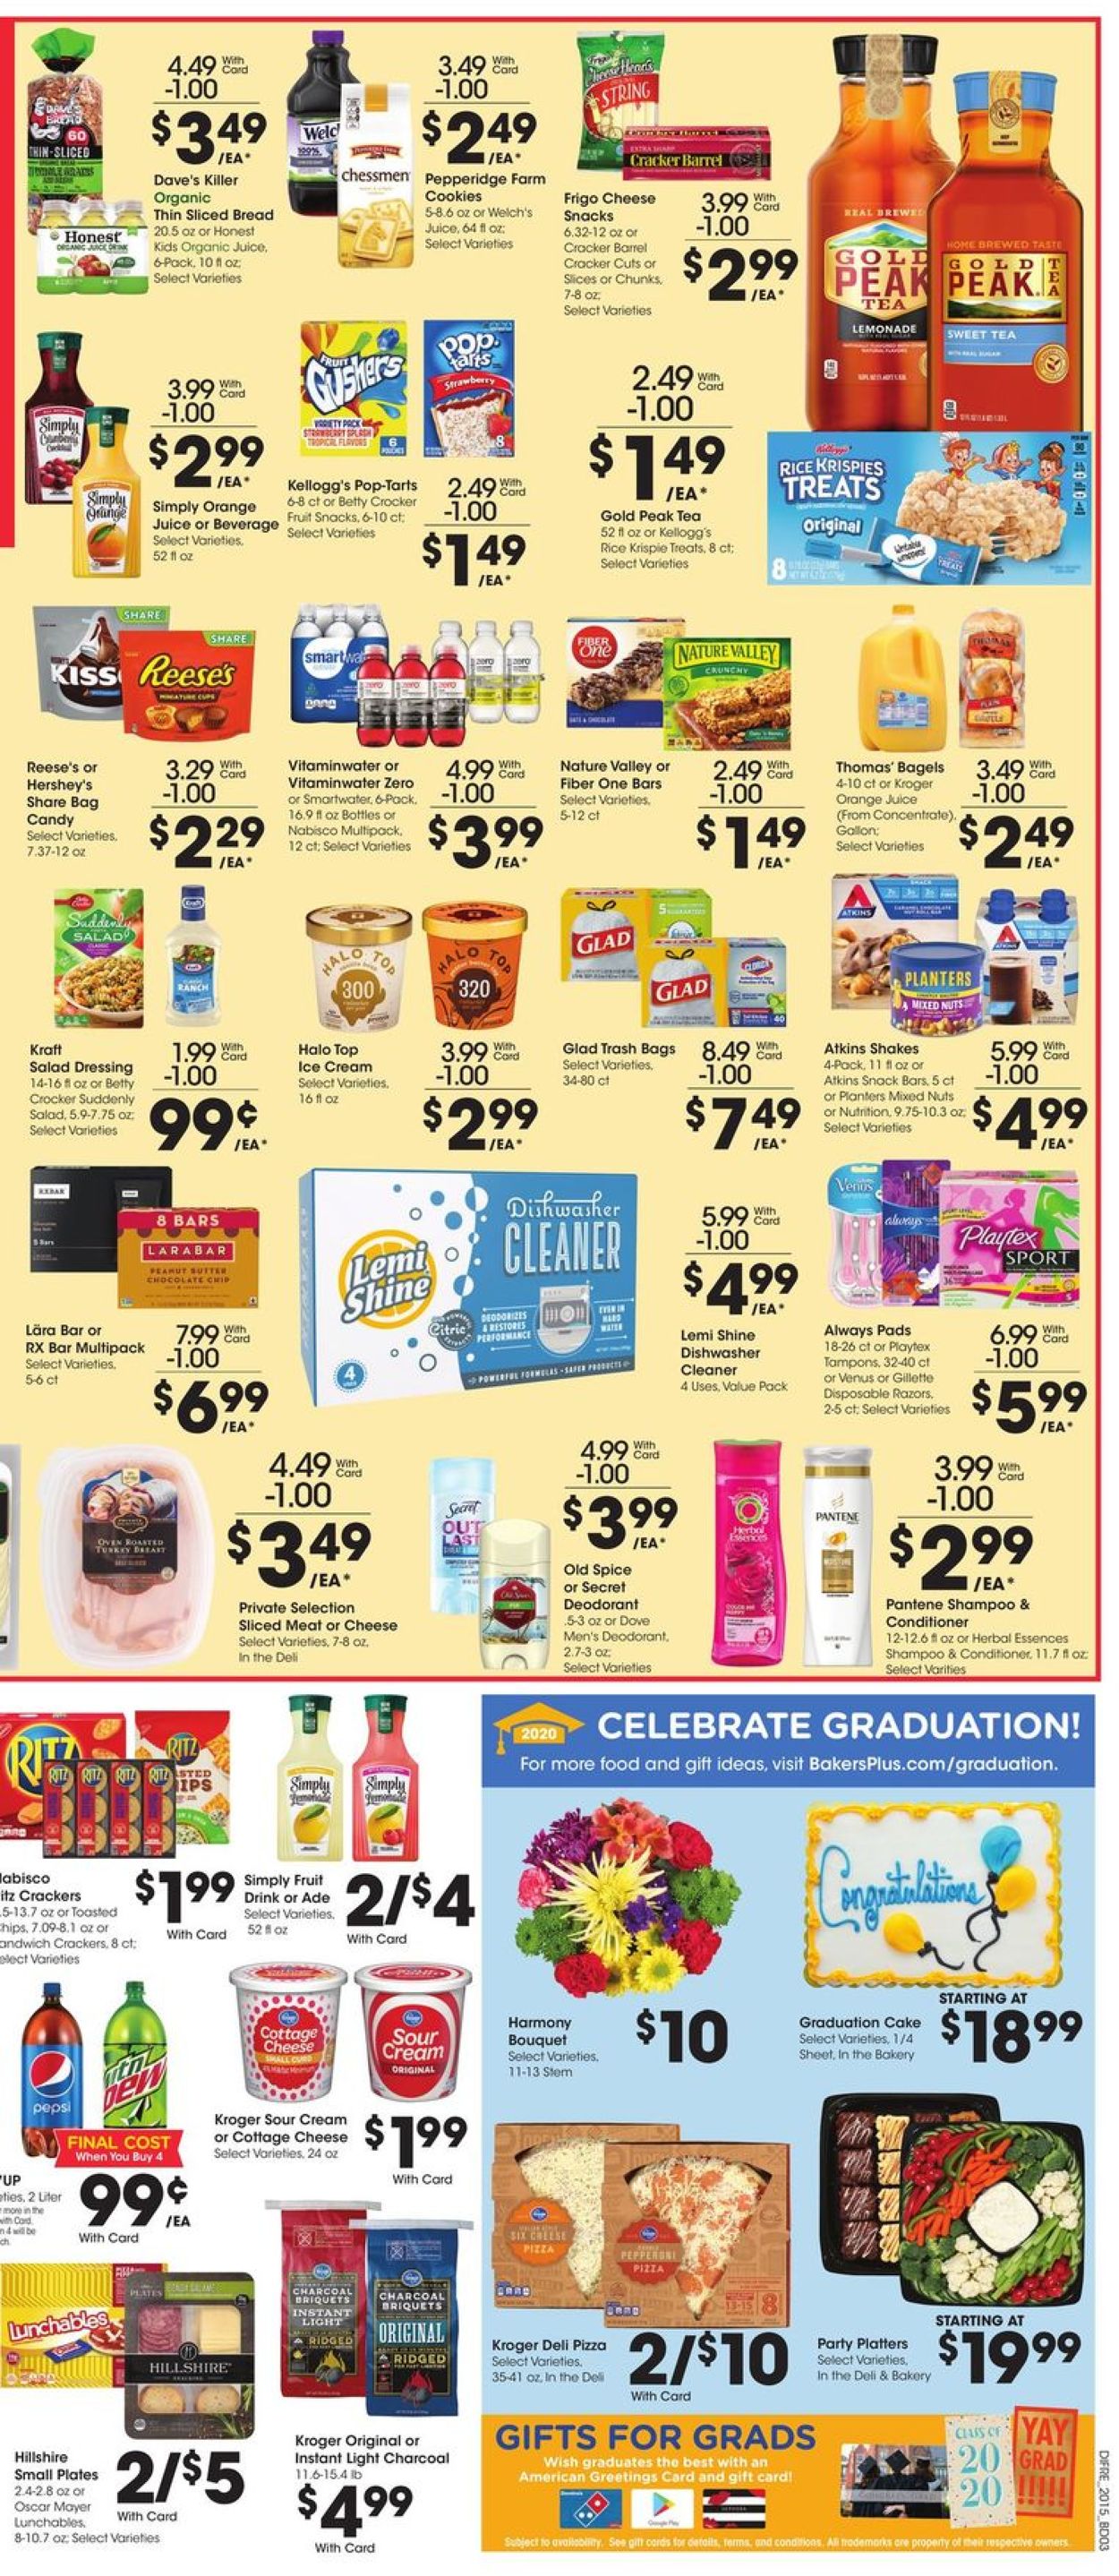 Baker's Current weekly ad 05/13 - 05/19/2020 [5] - frequent-ads.com